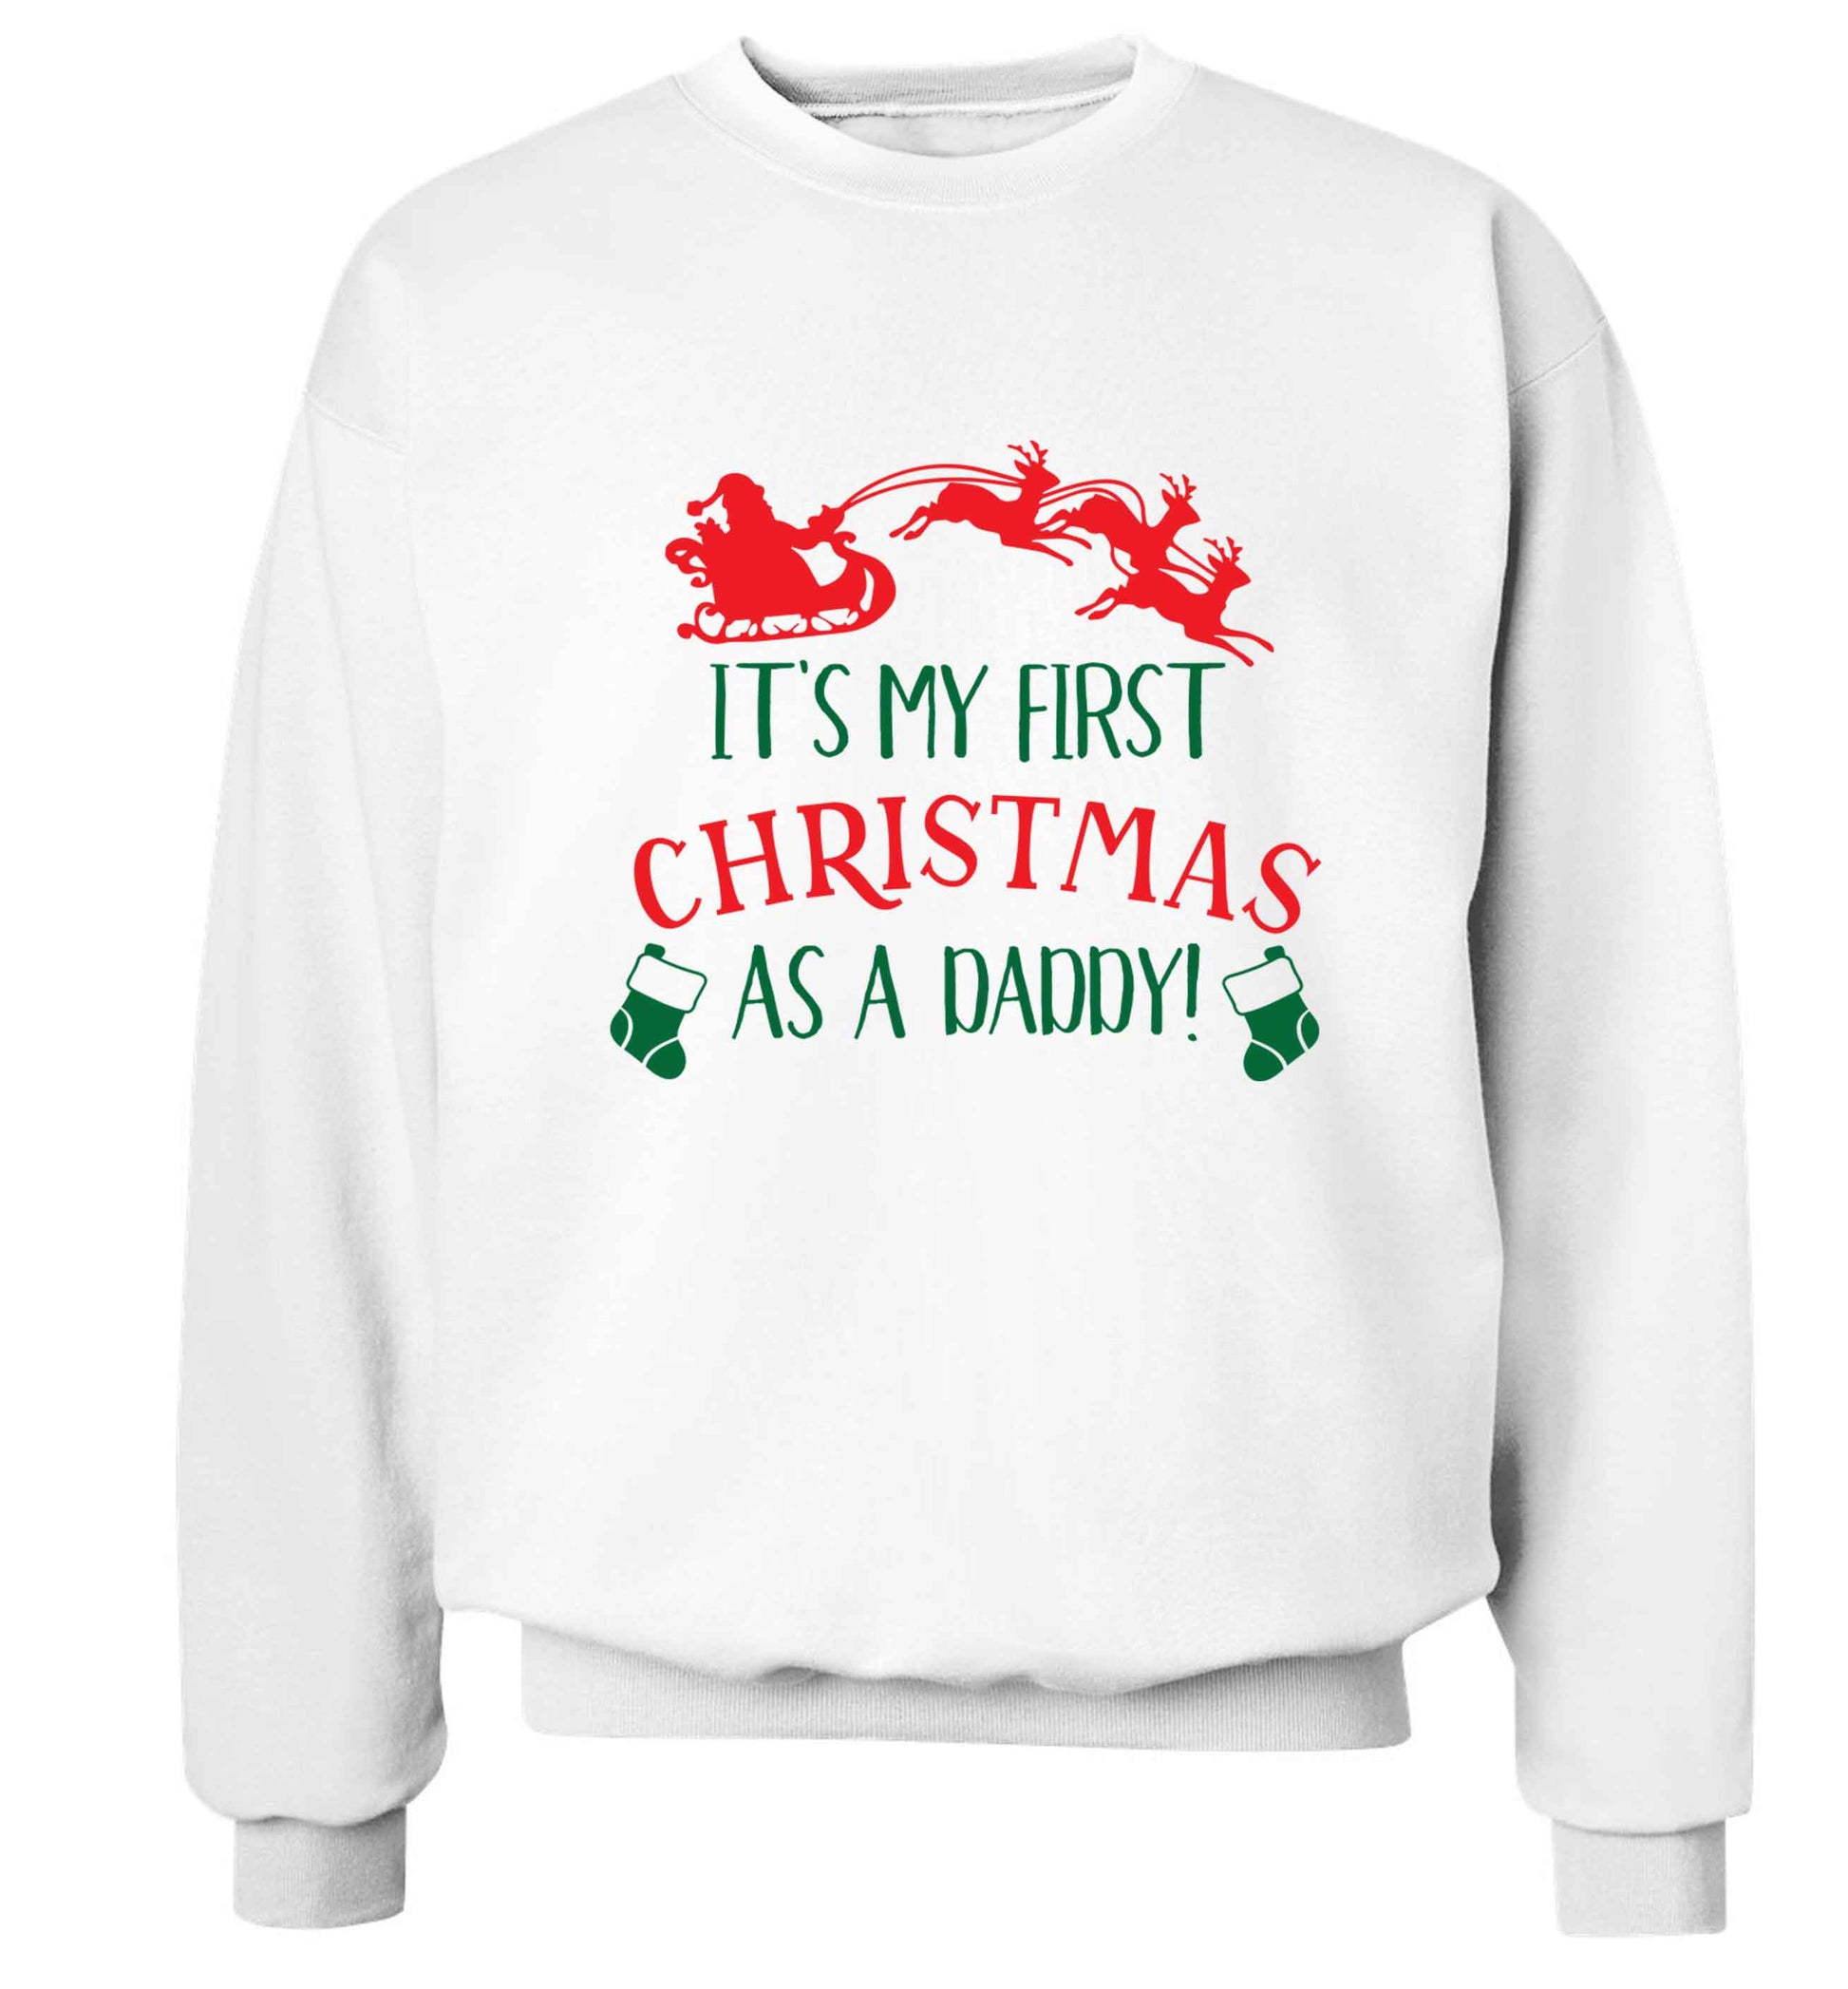 It's my first Christmas as a daddy Adult's unisex white Sweater 2XL